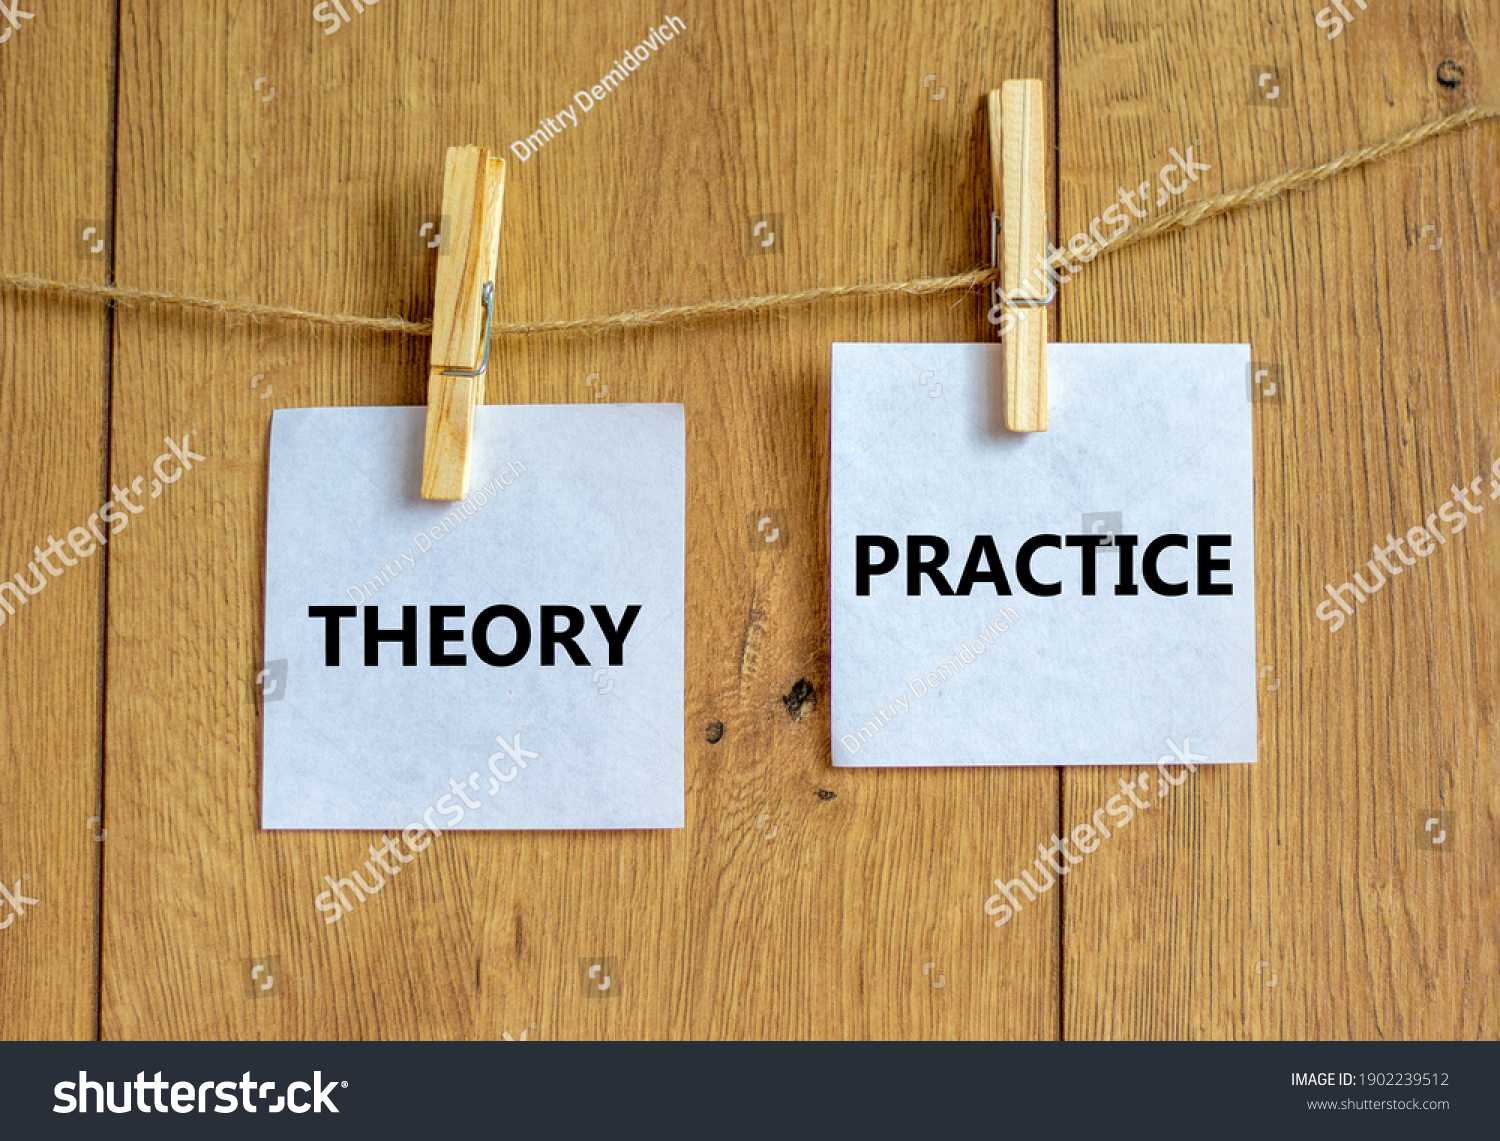 Theory and practice symbol. Wooden clothespins with white sheets of paper. Words 'theory practice'. Beautiful wooden background. Business, theory and practice concept, copy space. #1902239512